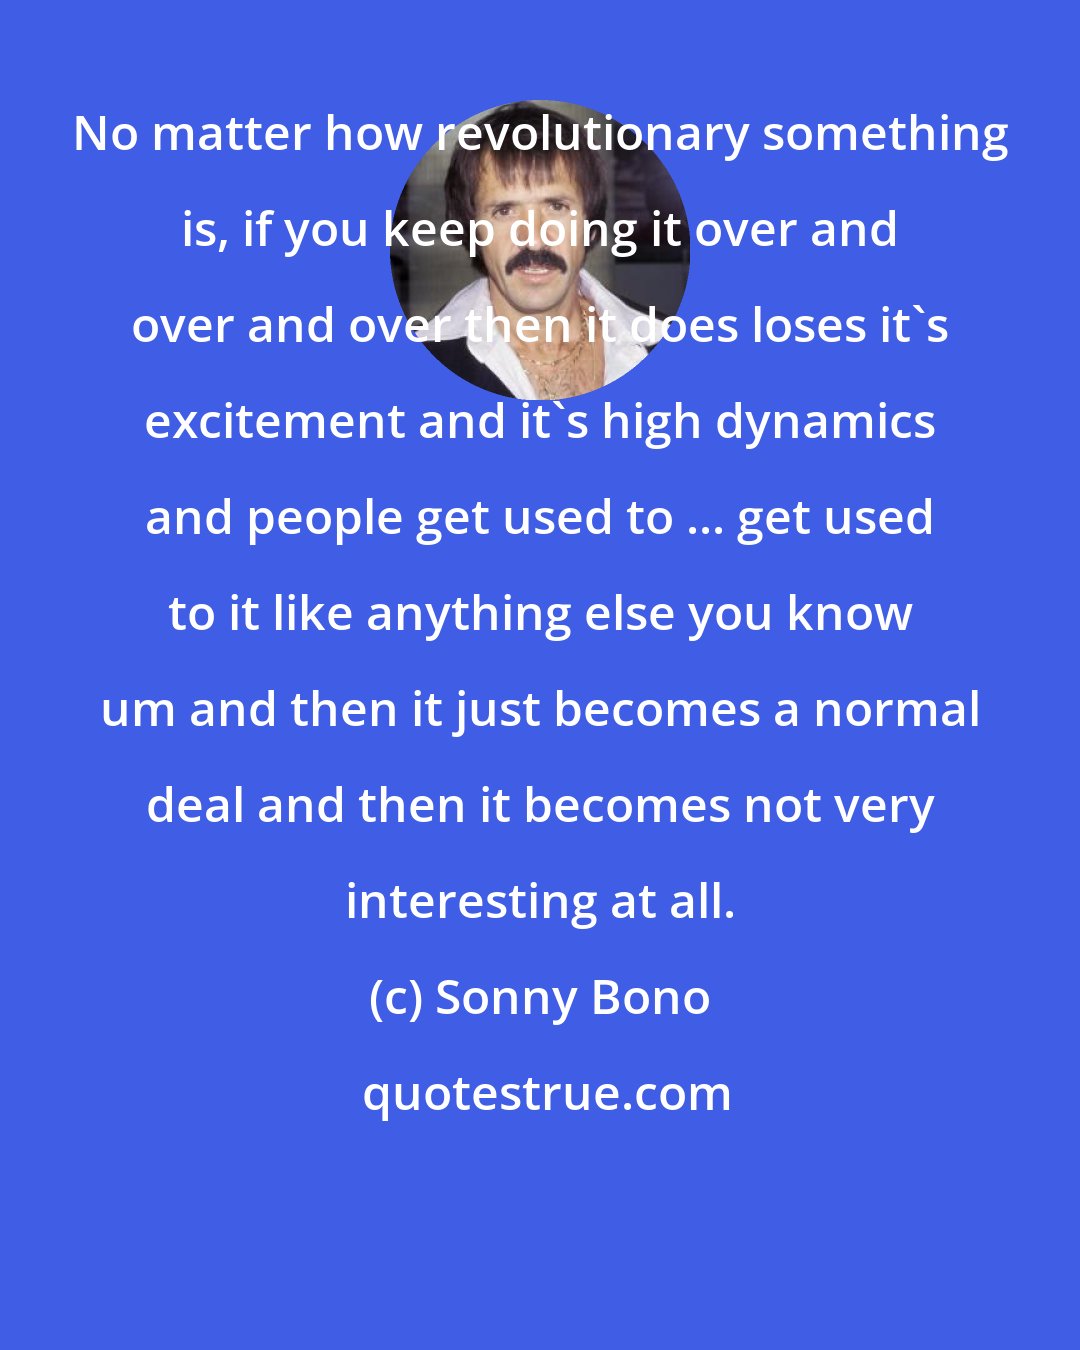 Sonny Bono: No matter how revolutionary something is, if you keep doing it over and over and over then it does loses it's excitement and it's high dynamics and people get used to ... get used to it like anything else you know um and then it just becomes a normal deal and then it becomes not very interesting at all.